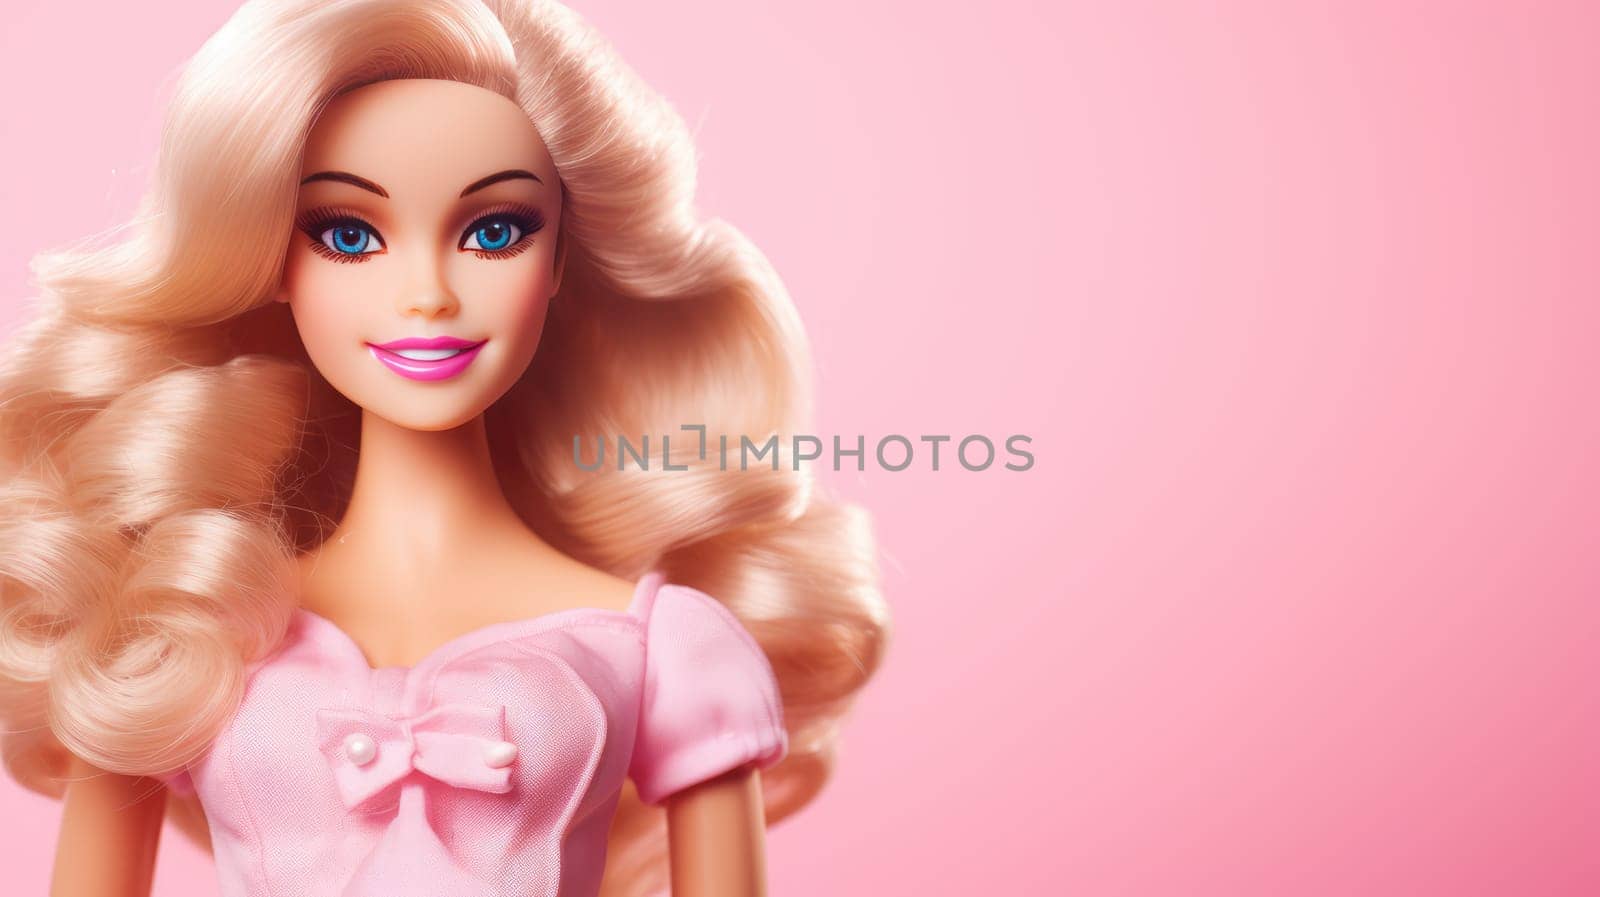 Portrait of smiling blonde doll in pink dress on pink background